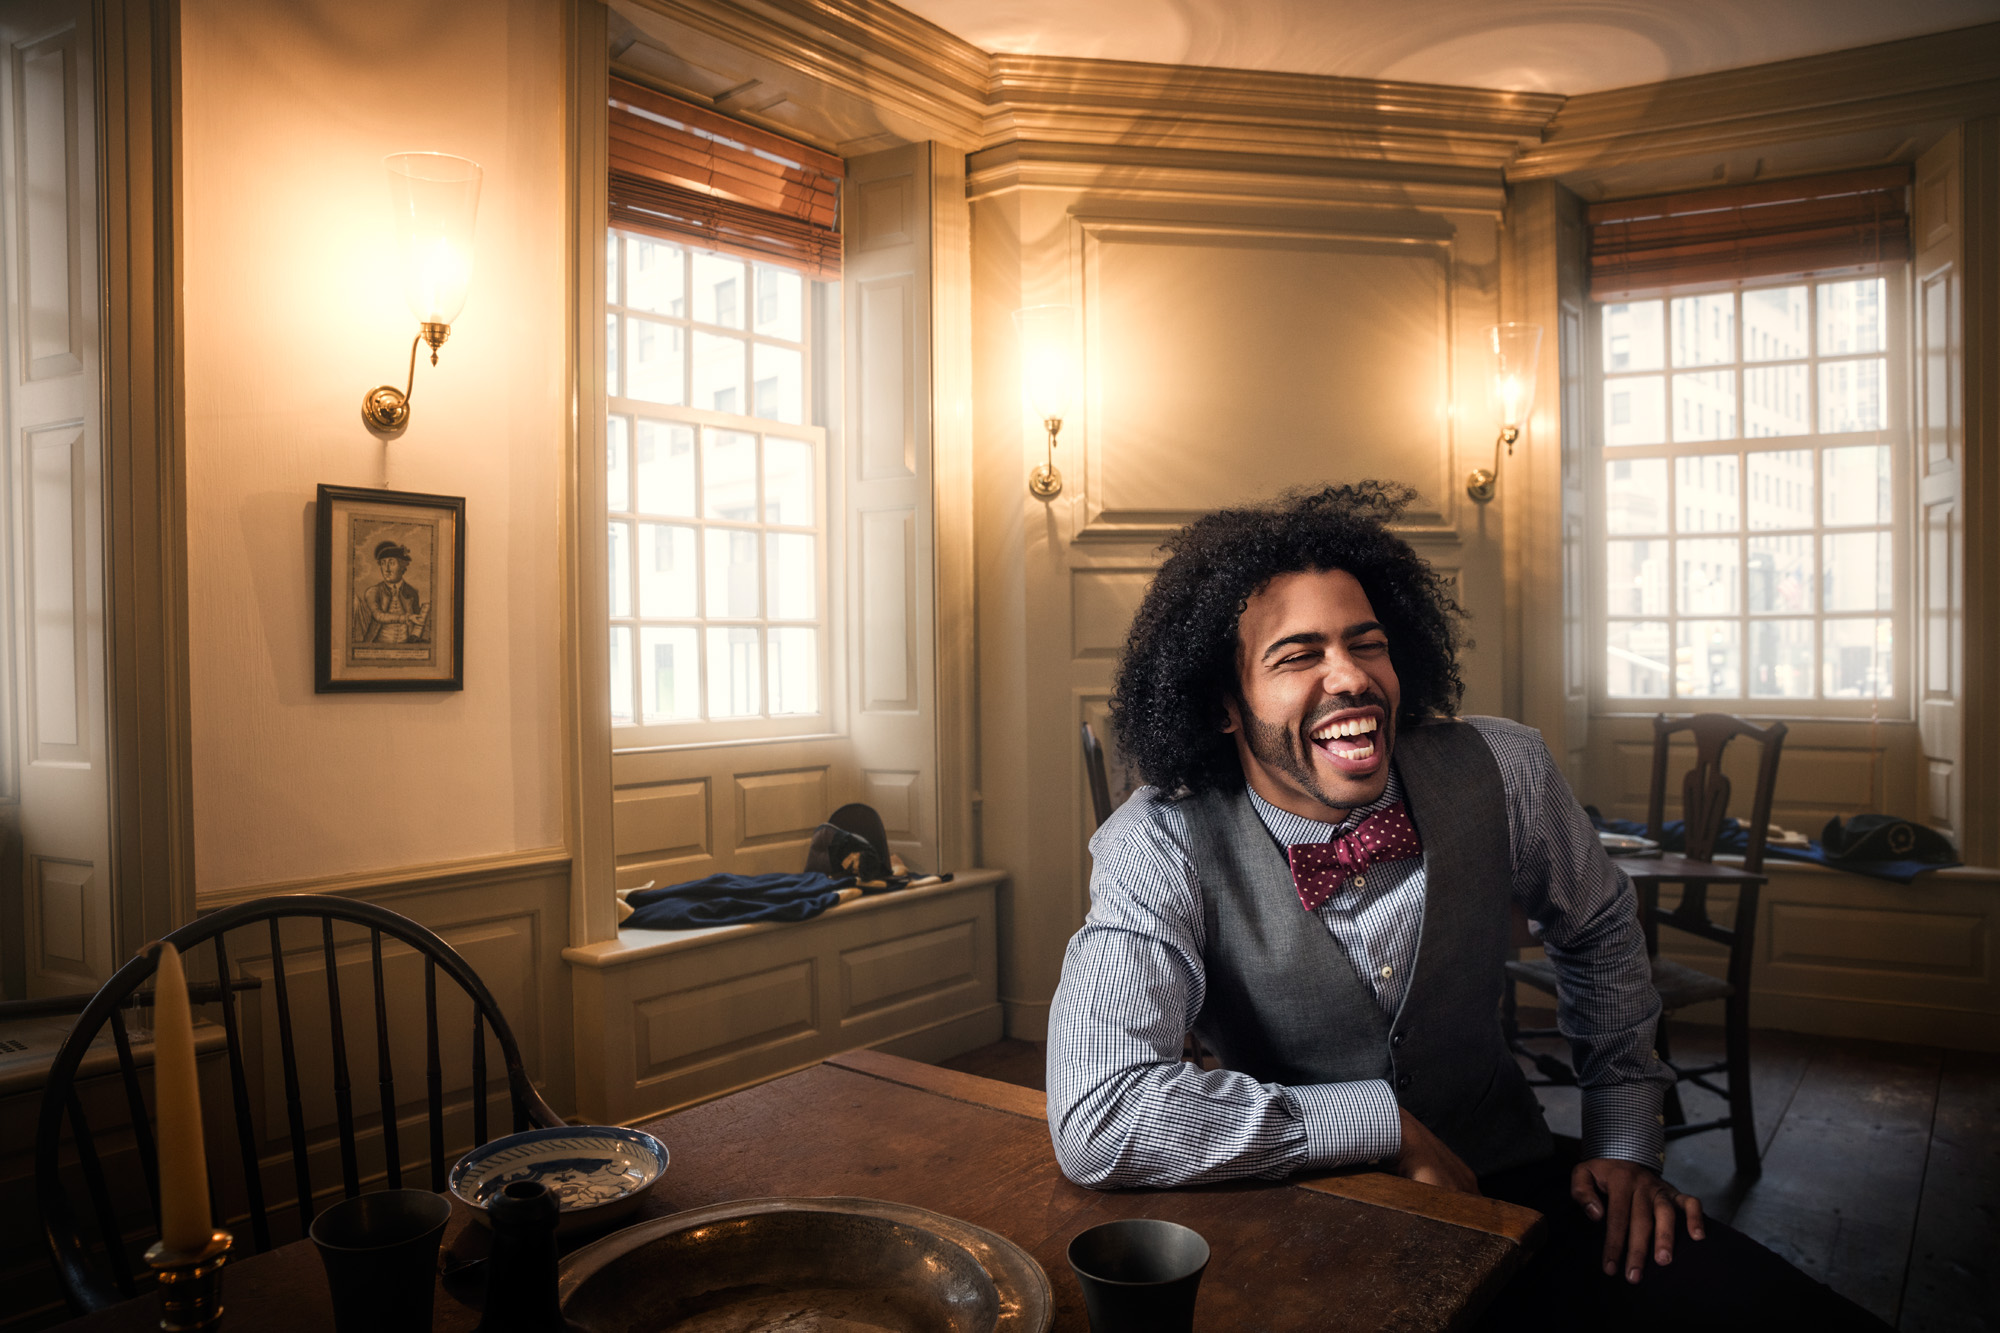 cc2016007 - Daveed Diggs photographed for NY Observer